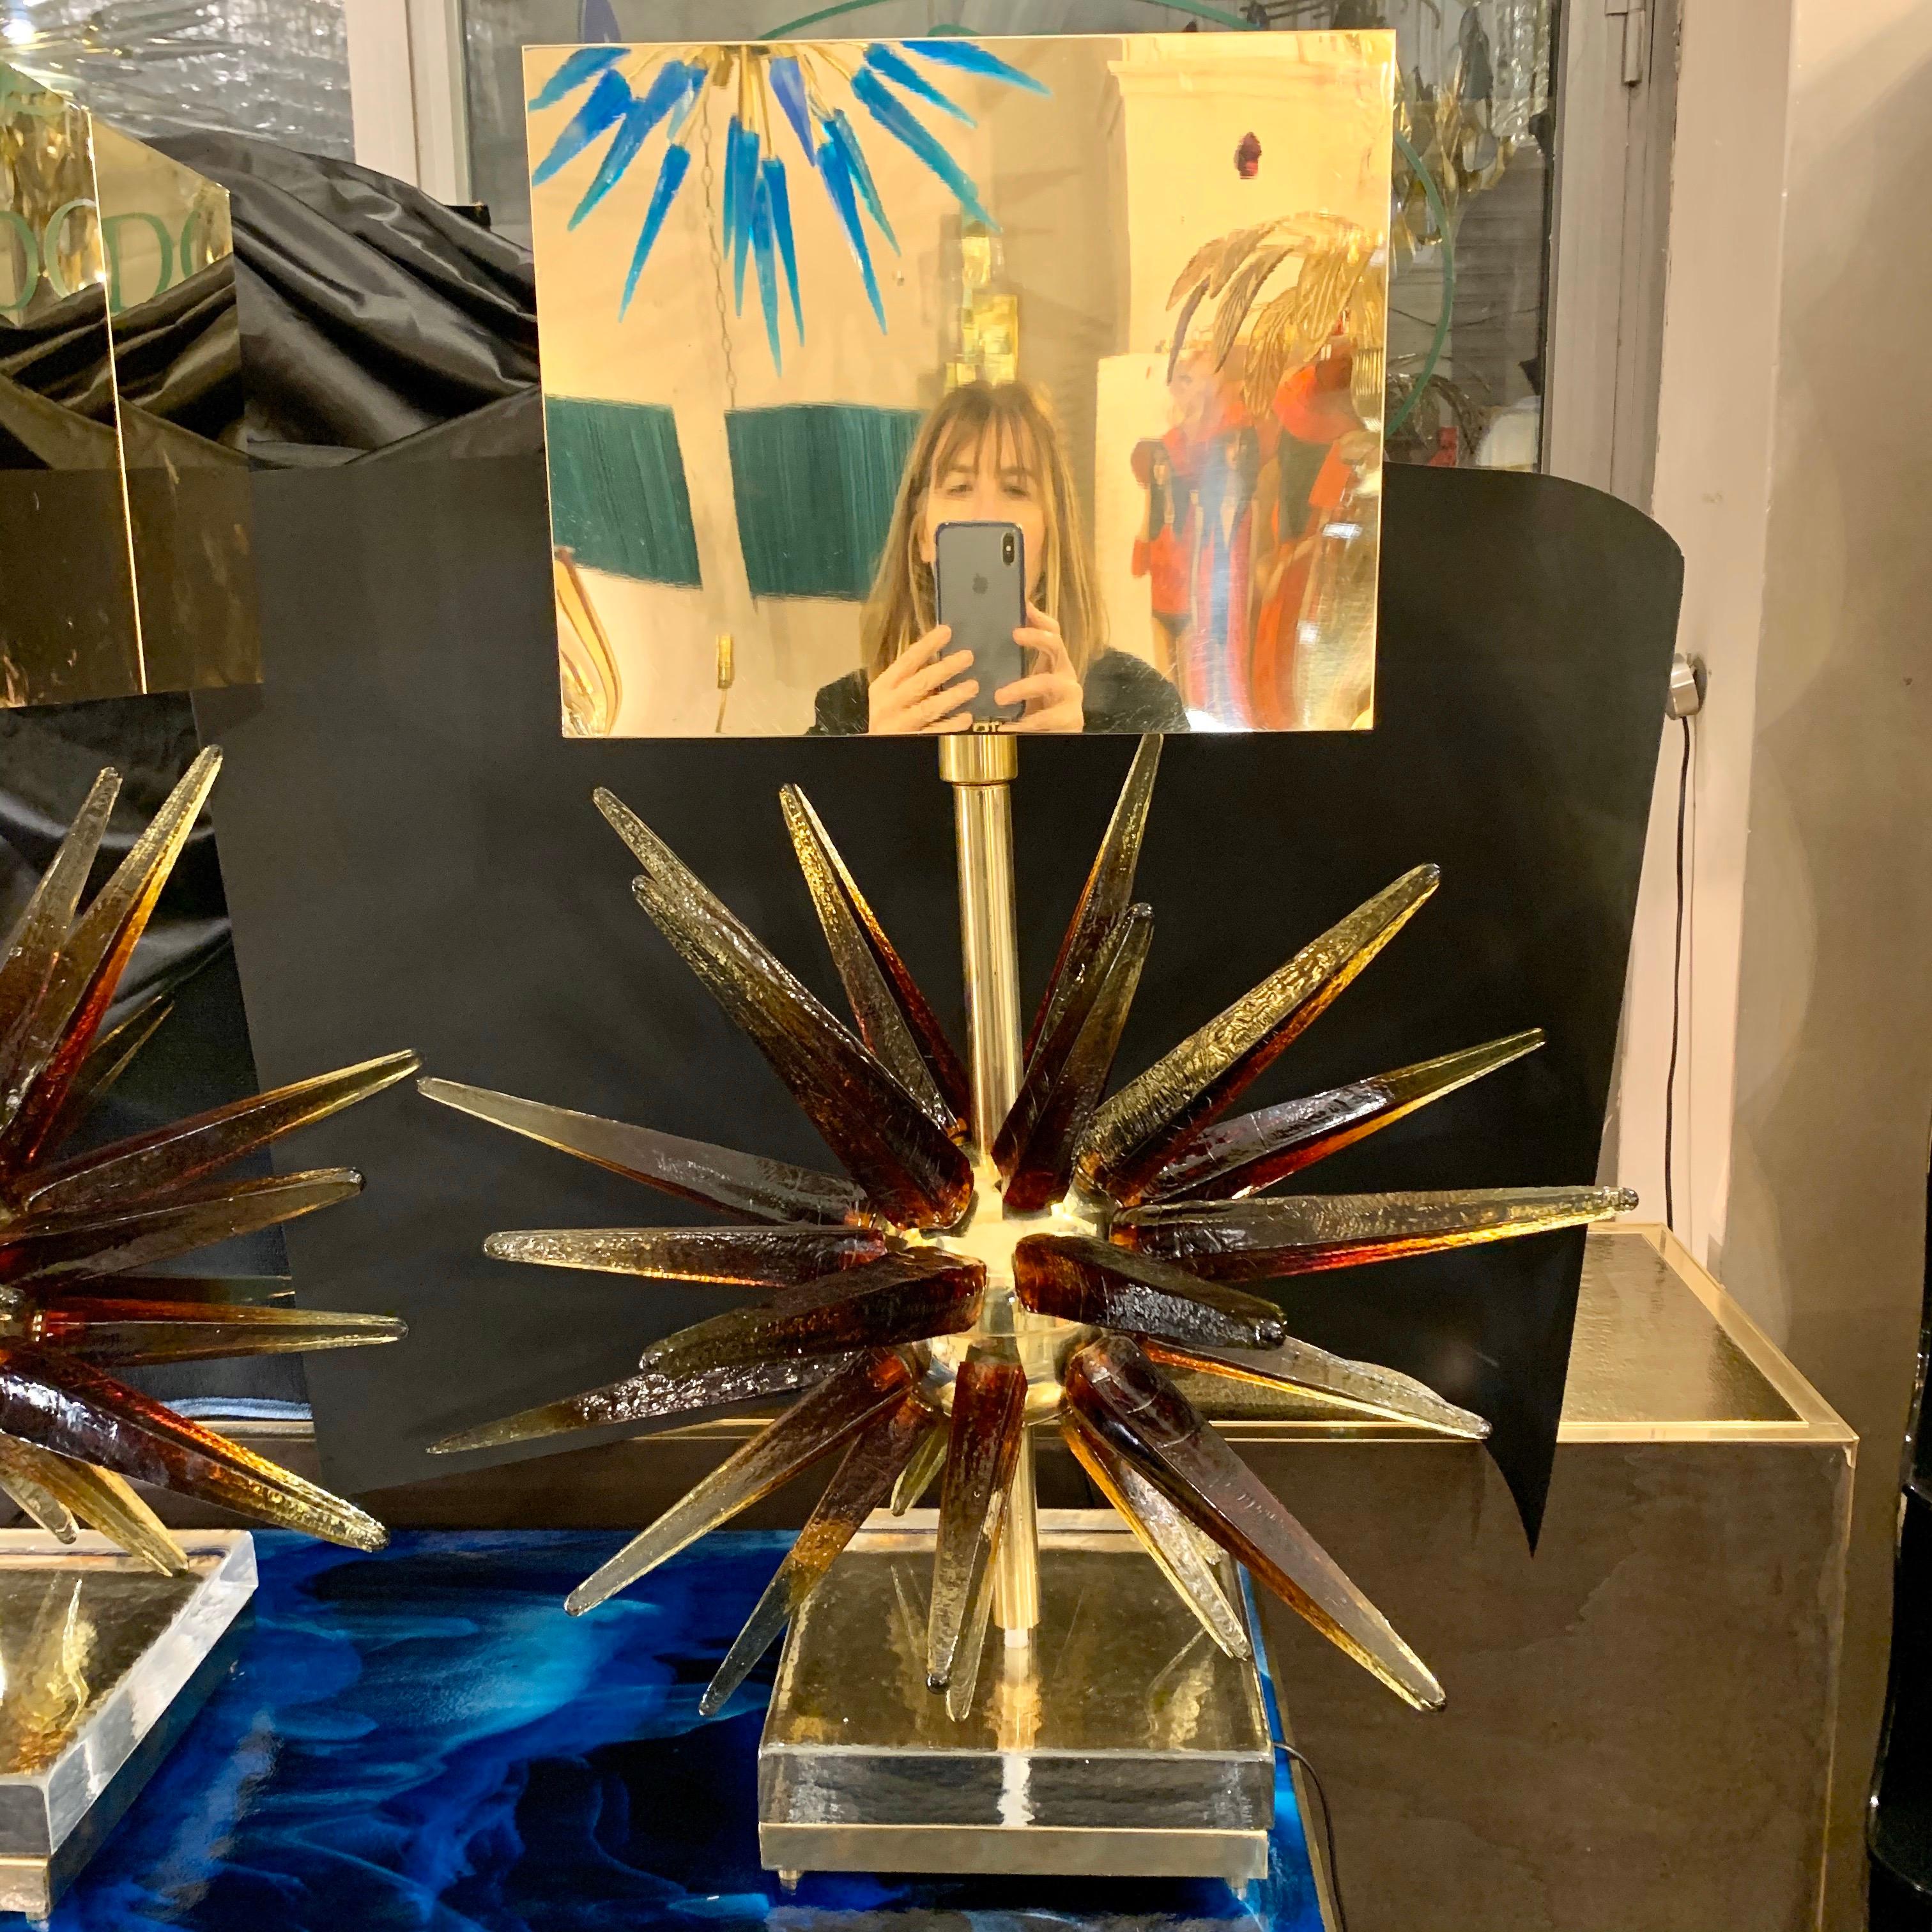 Murano glass Sputnik table lamp with square brass lampshades.
The Murano glass tips have a wonderful shaded color that goes from bronze to gold at the far end.
When the light is reflected on the glass the color changes and takes on wonderful